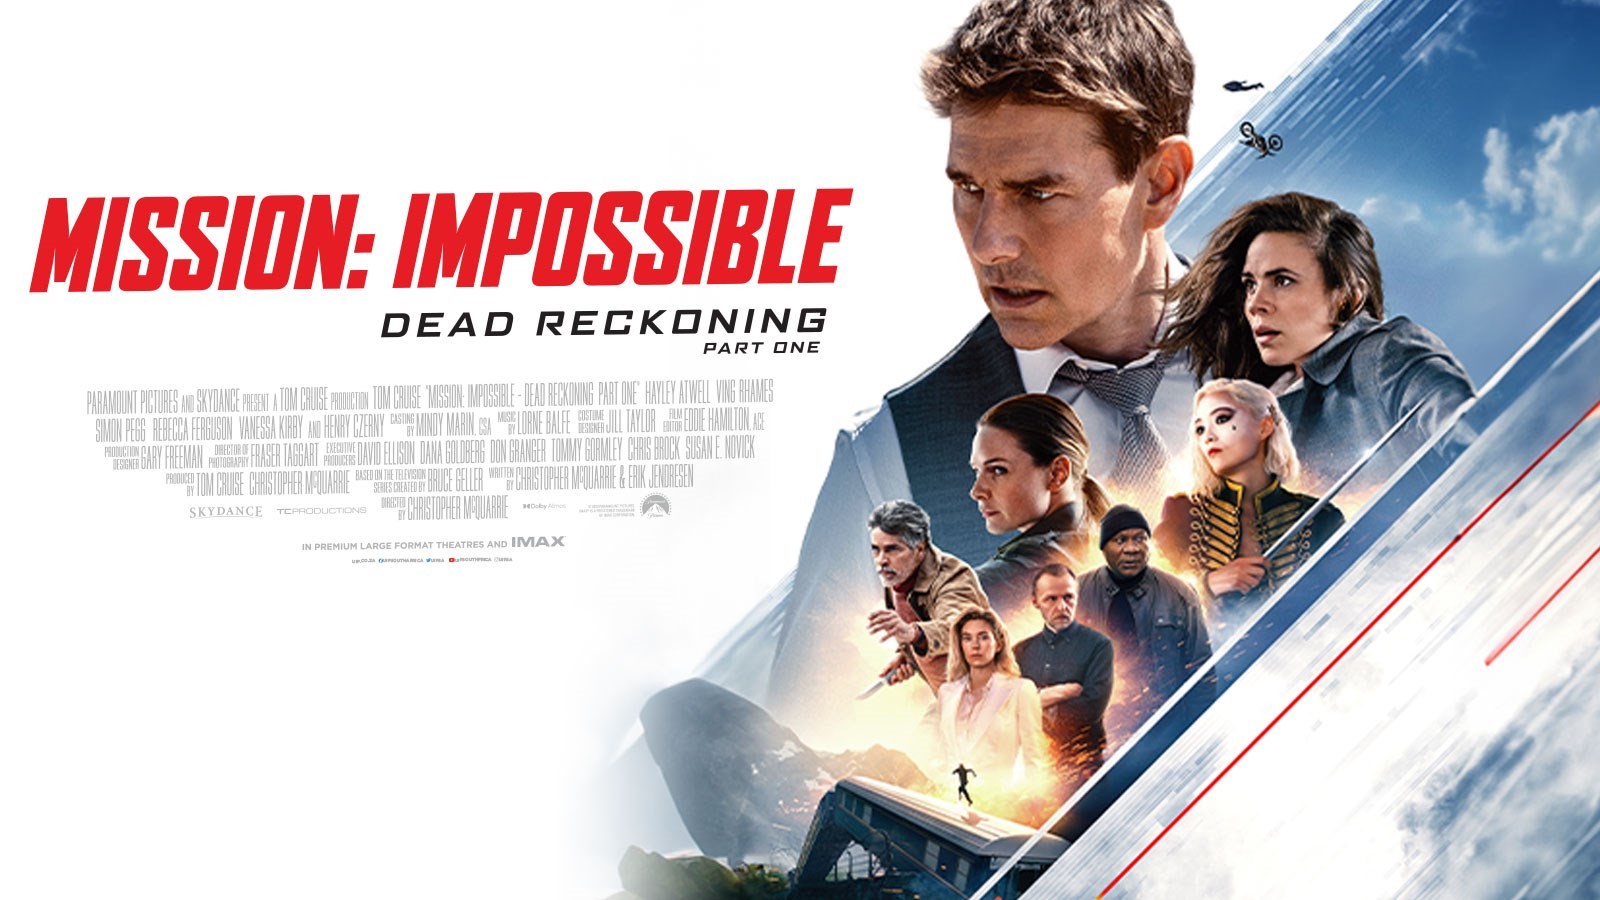 Mission Impossible Dead reckoning